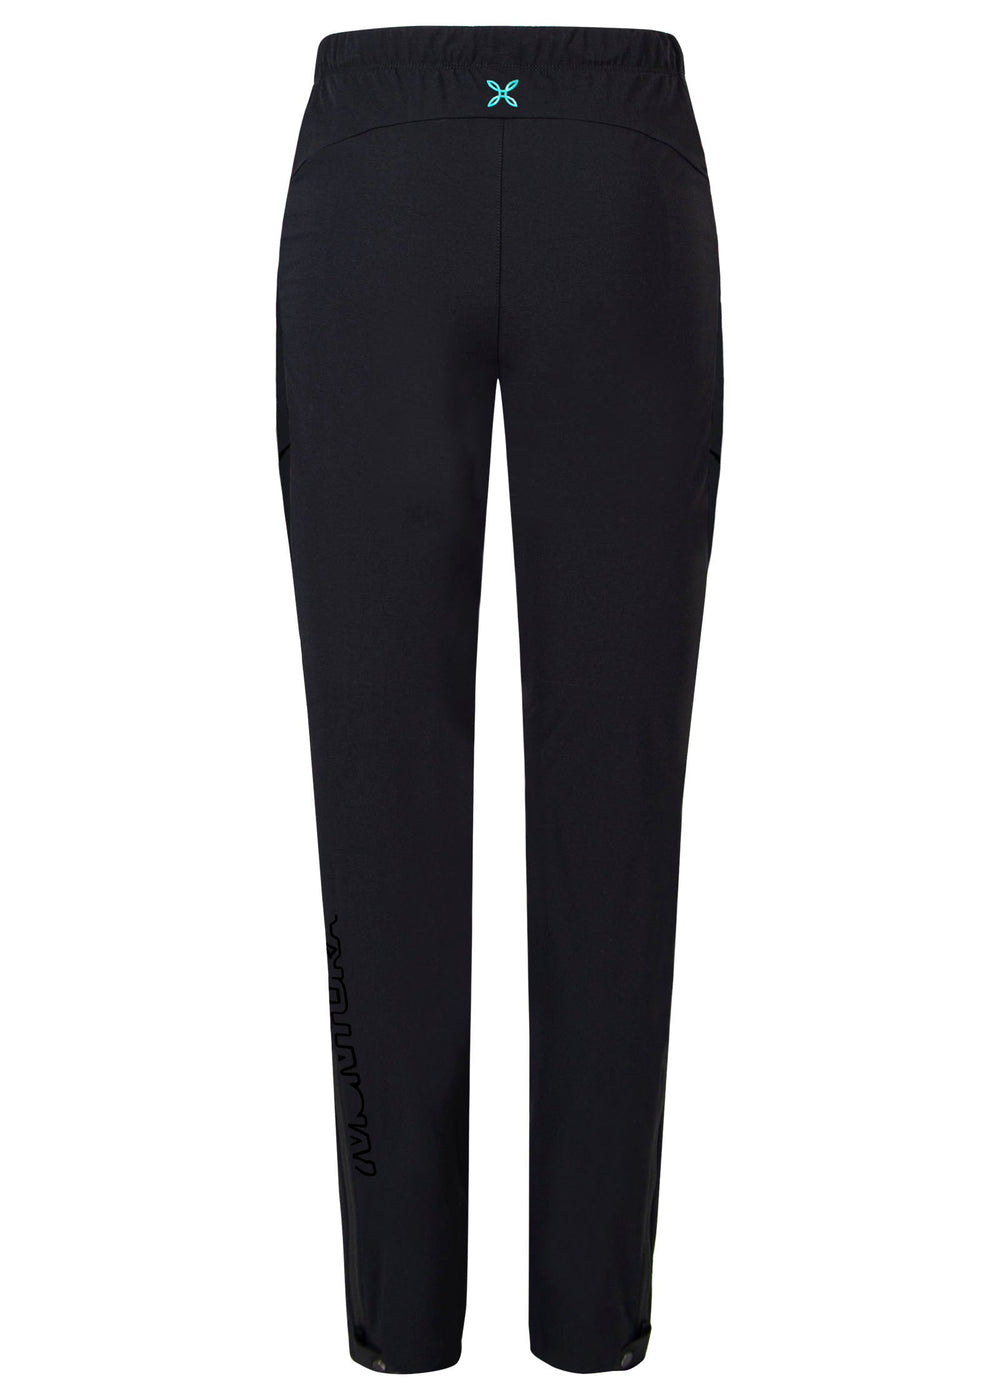 Speed Style Pants Woman - Nero/Care Blue (9028) - Blogside